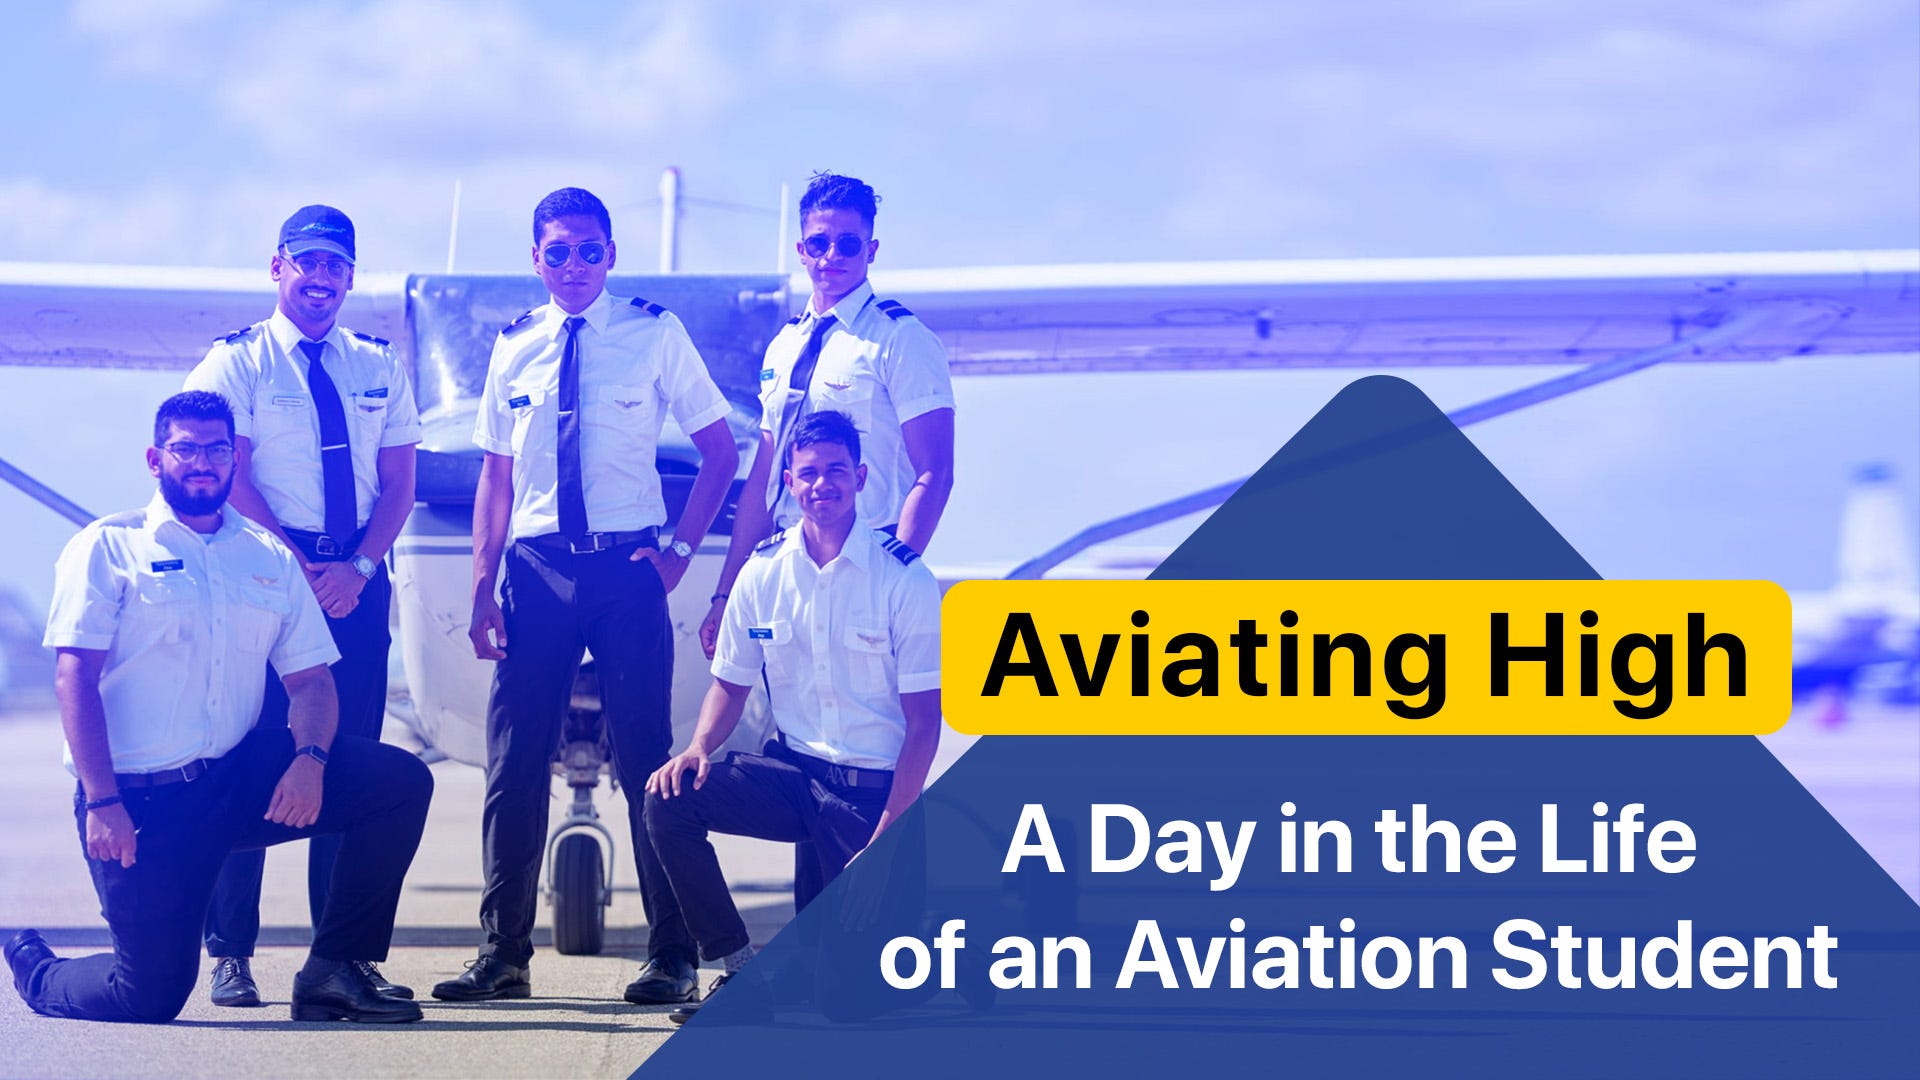 A Day in the Life of an Aviation Student